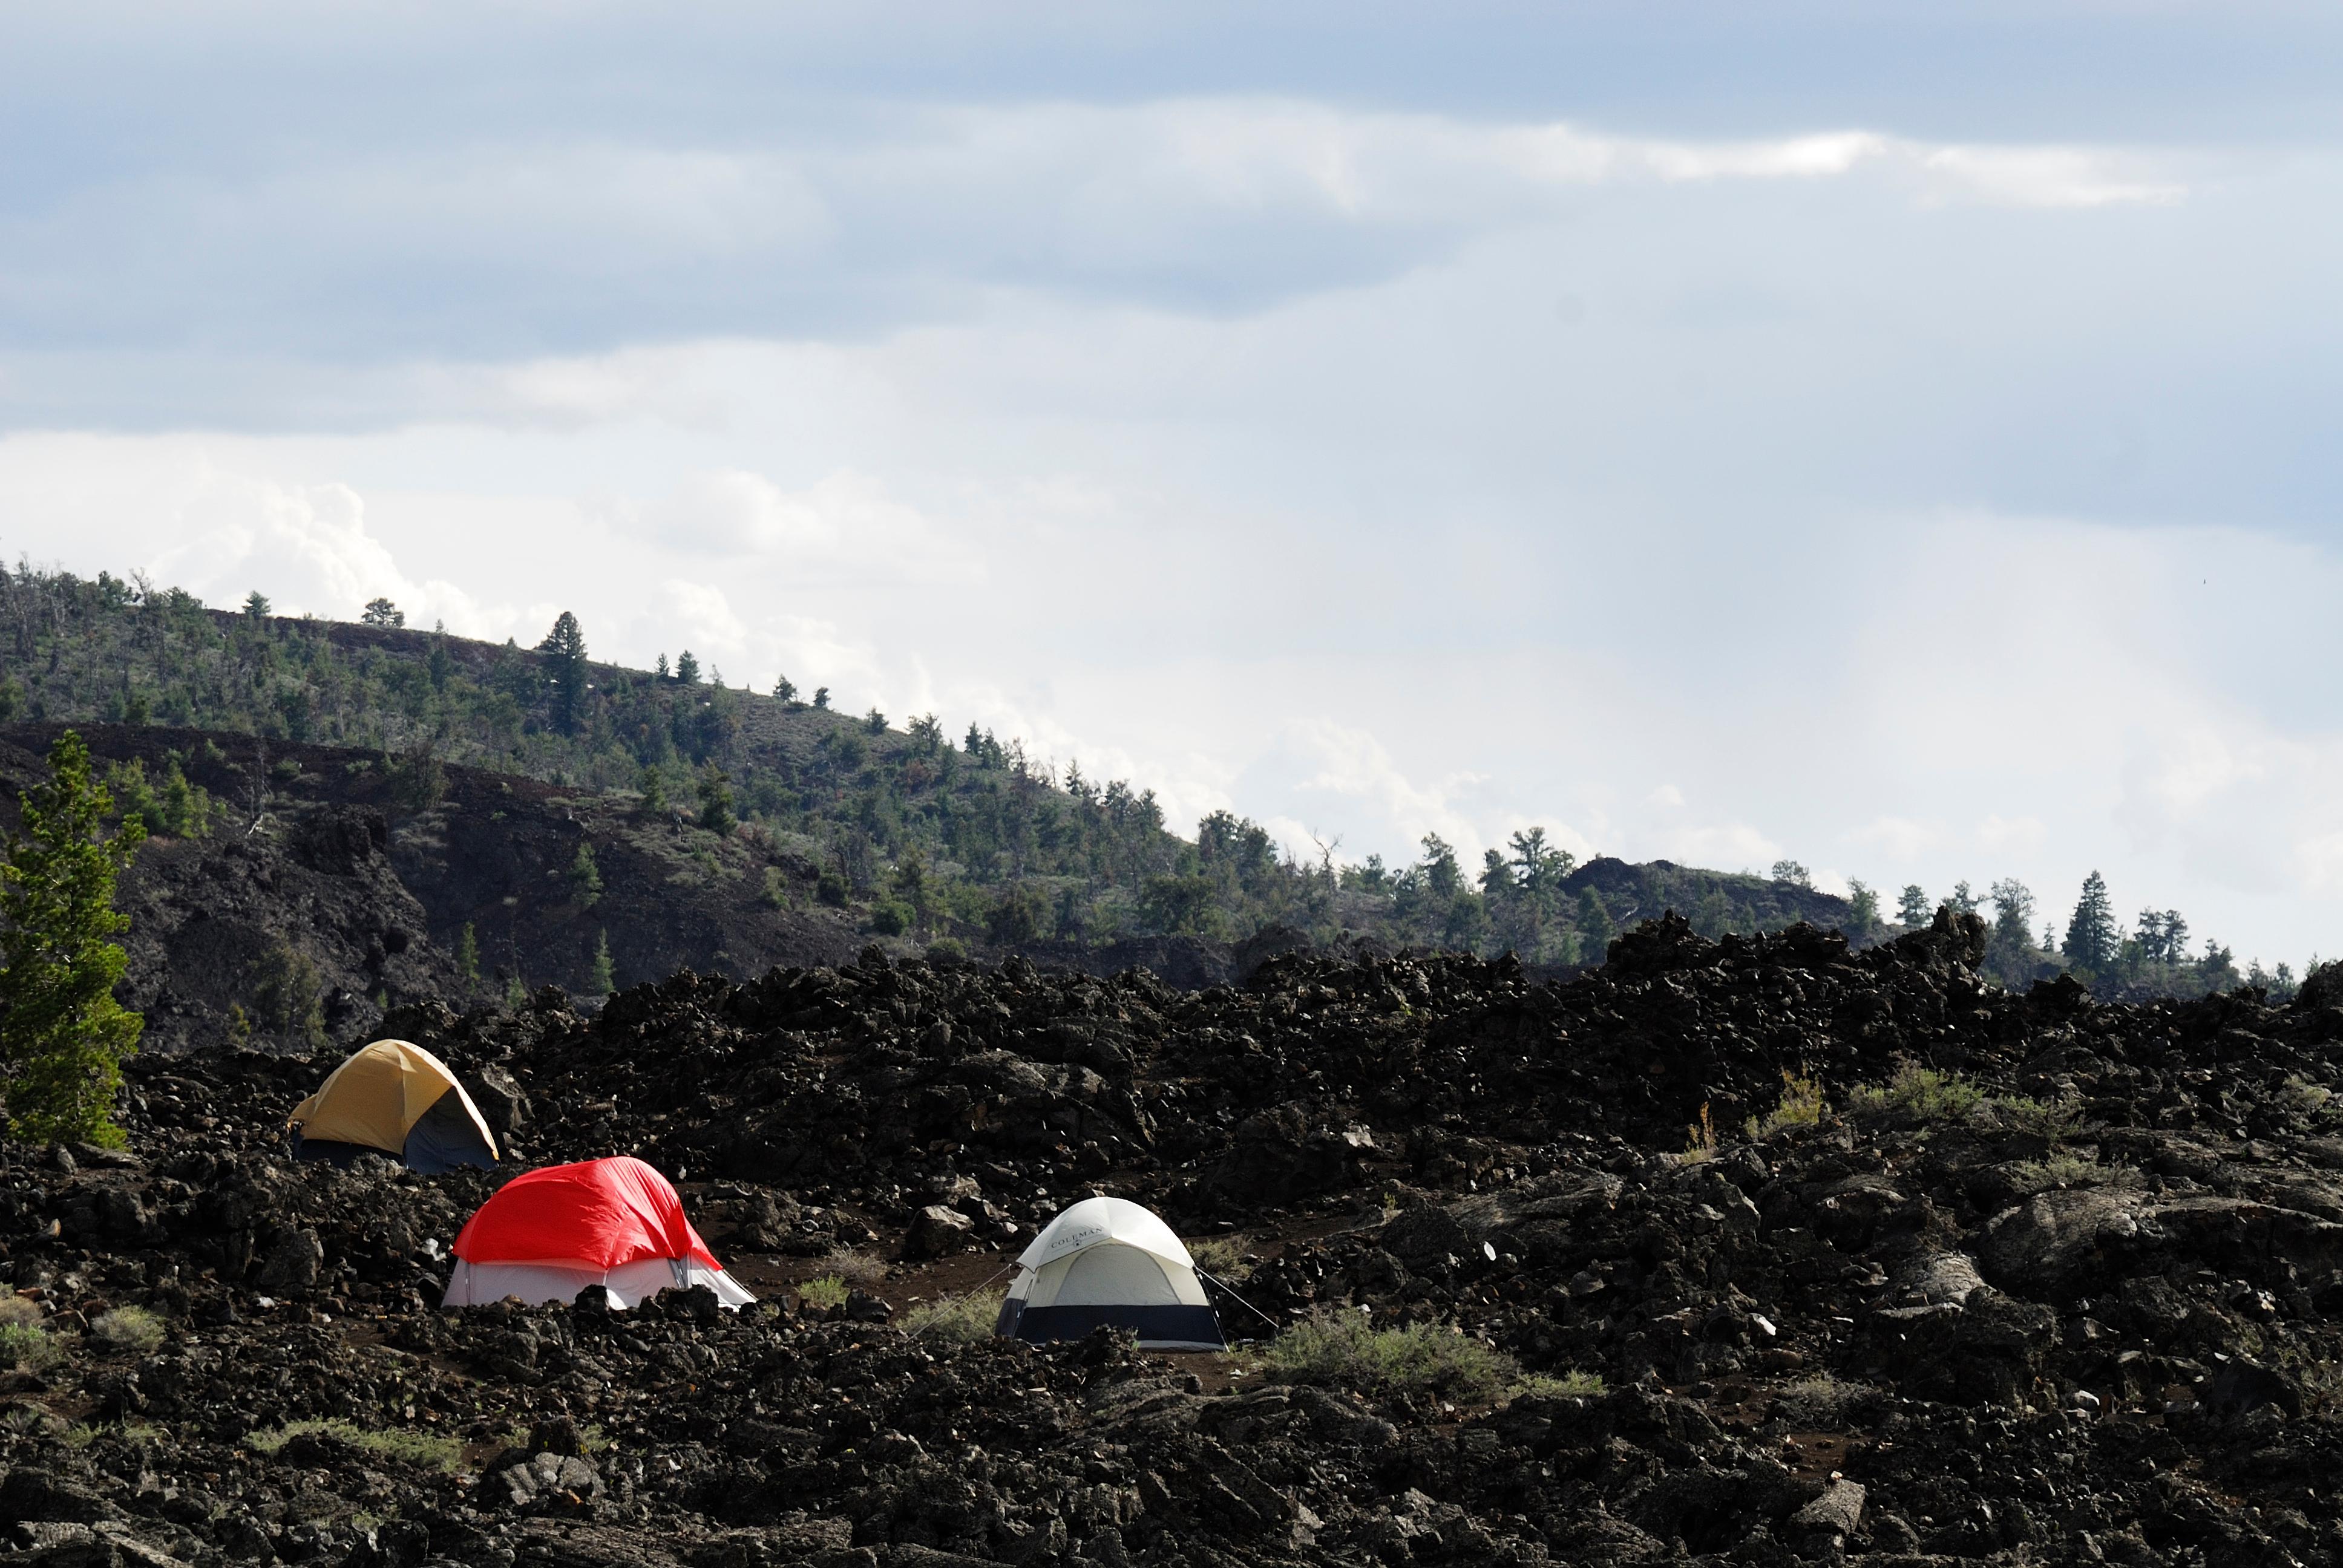 three tents on a hill of black lava rocks with a dark hill covered with trees in the distance